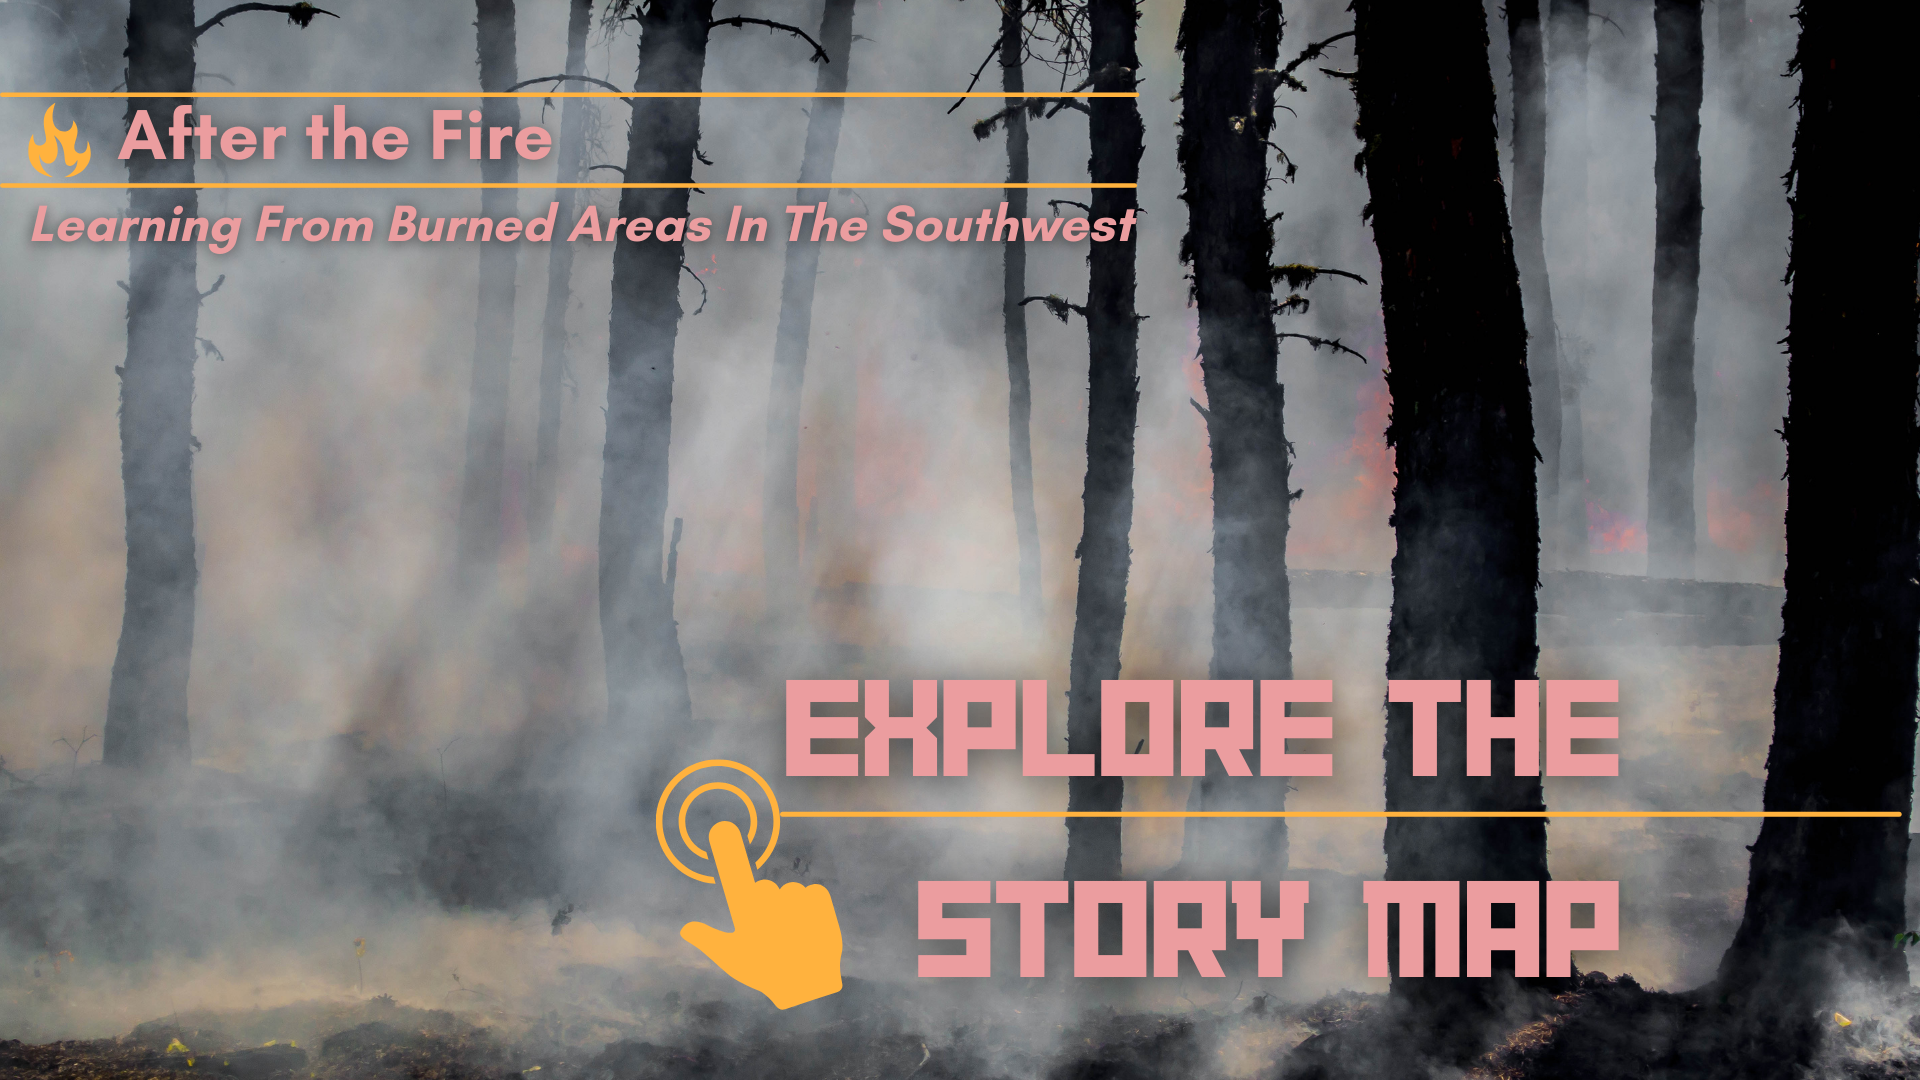 A close-up of a forest fire, with smoke and burned trees in the foreground and some flames in the background. Image Text reads: "After the Fire: Learning From Burned Areas in the Southwest" and "Explore the Story Map"